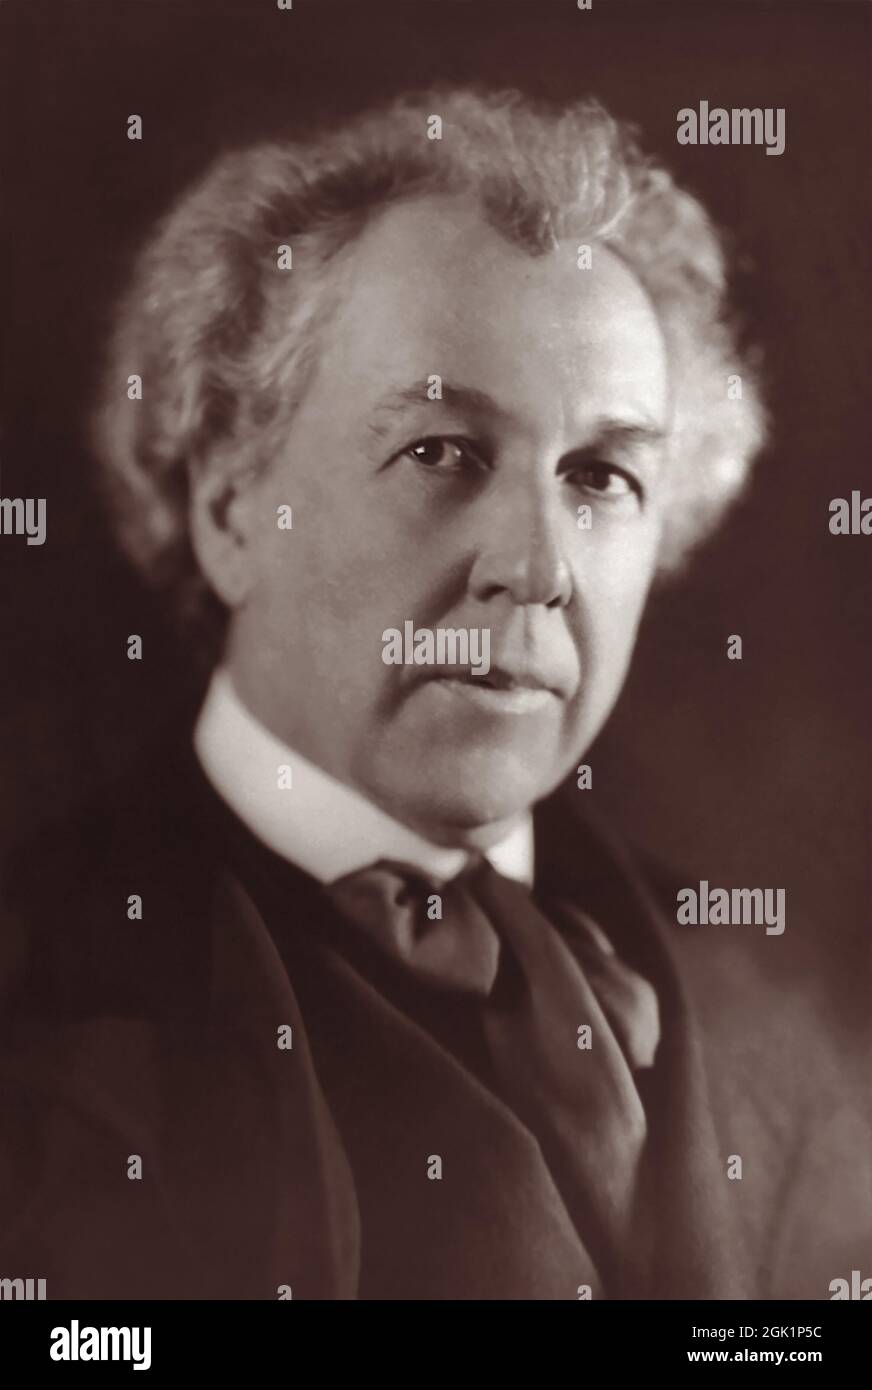 Frank Lloyd Wright (1867-1959), American architect pioneer of what came to be called the Prairie School movement, in a portrait from 1926. Wright would later be recognized (in 1991) by the American Institute of Architects as 'the greatest American architect of all time.' Stock Photo